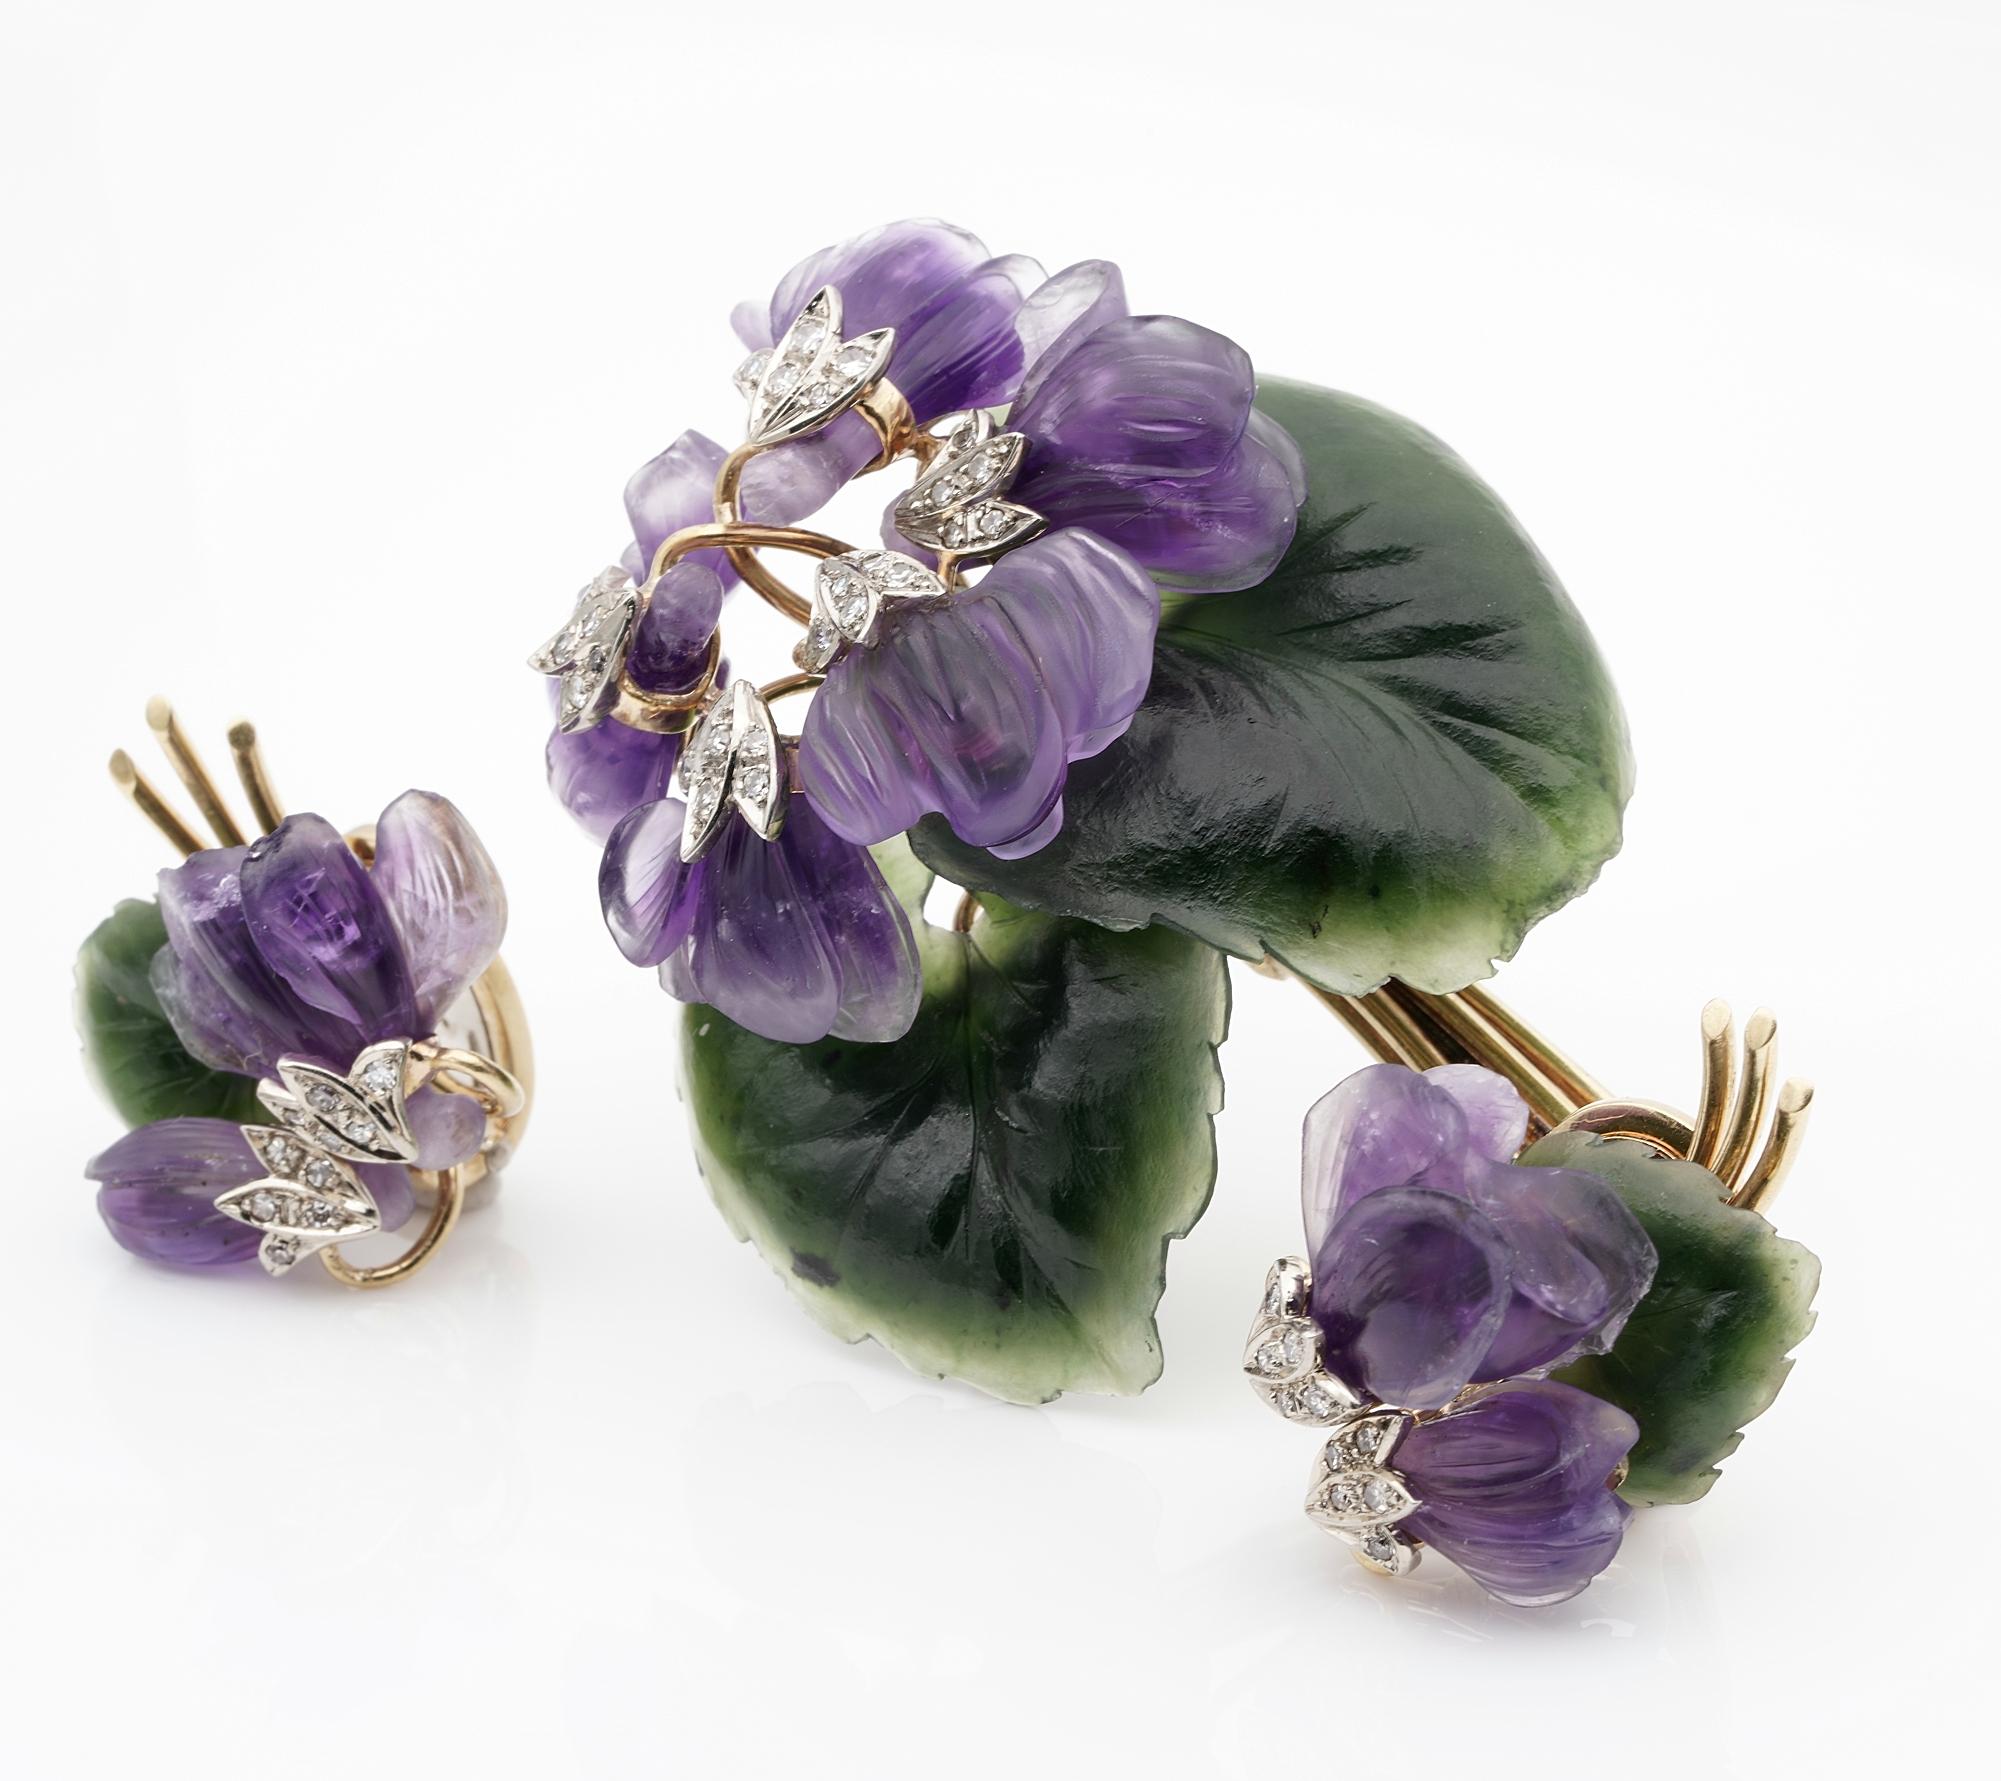 Vienna Carved Amethyst Nephrite Diamond Bunch Violet Brooch Earrings Suite For Sale 1